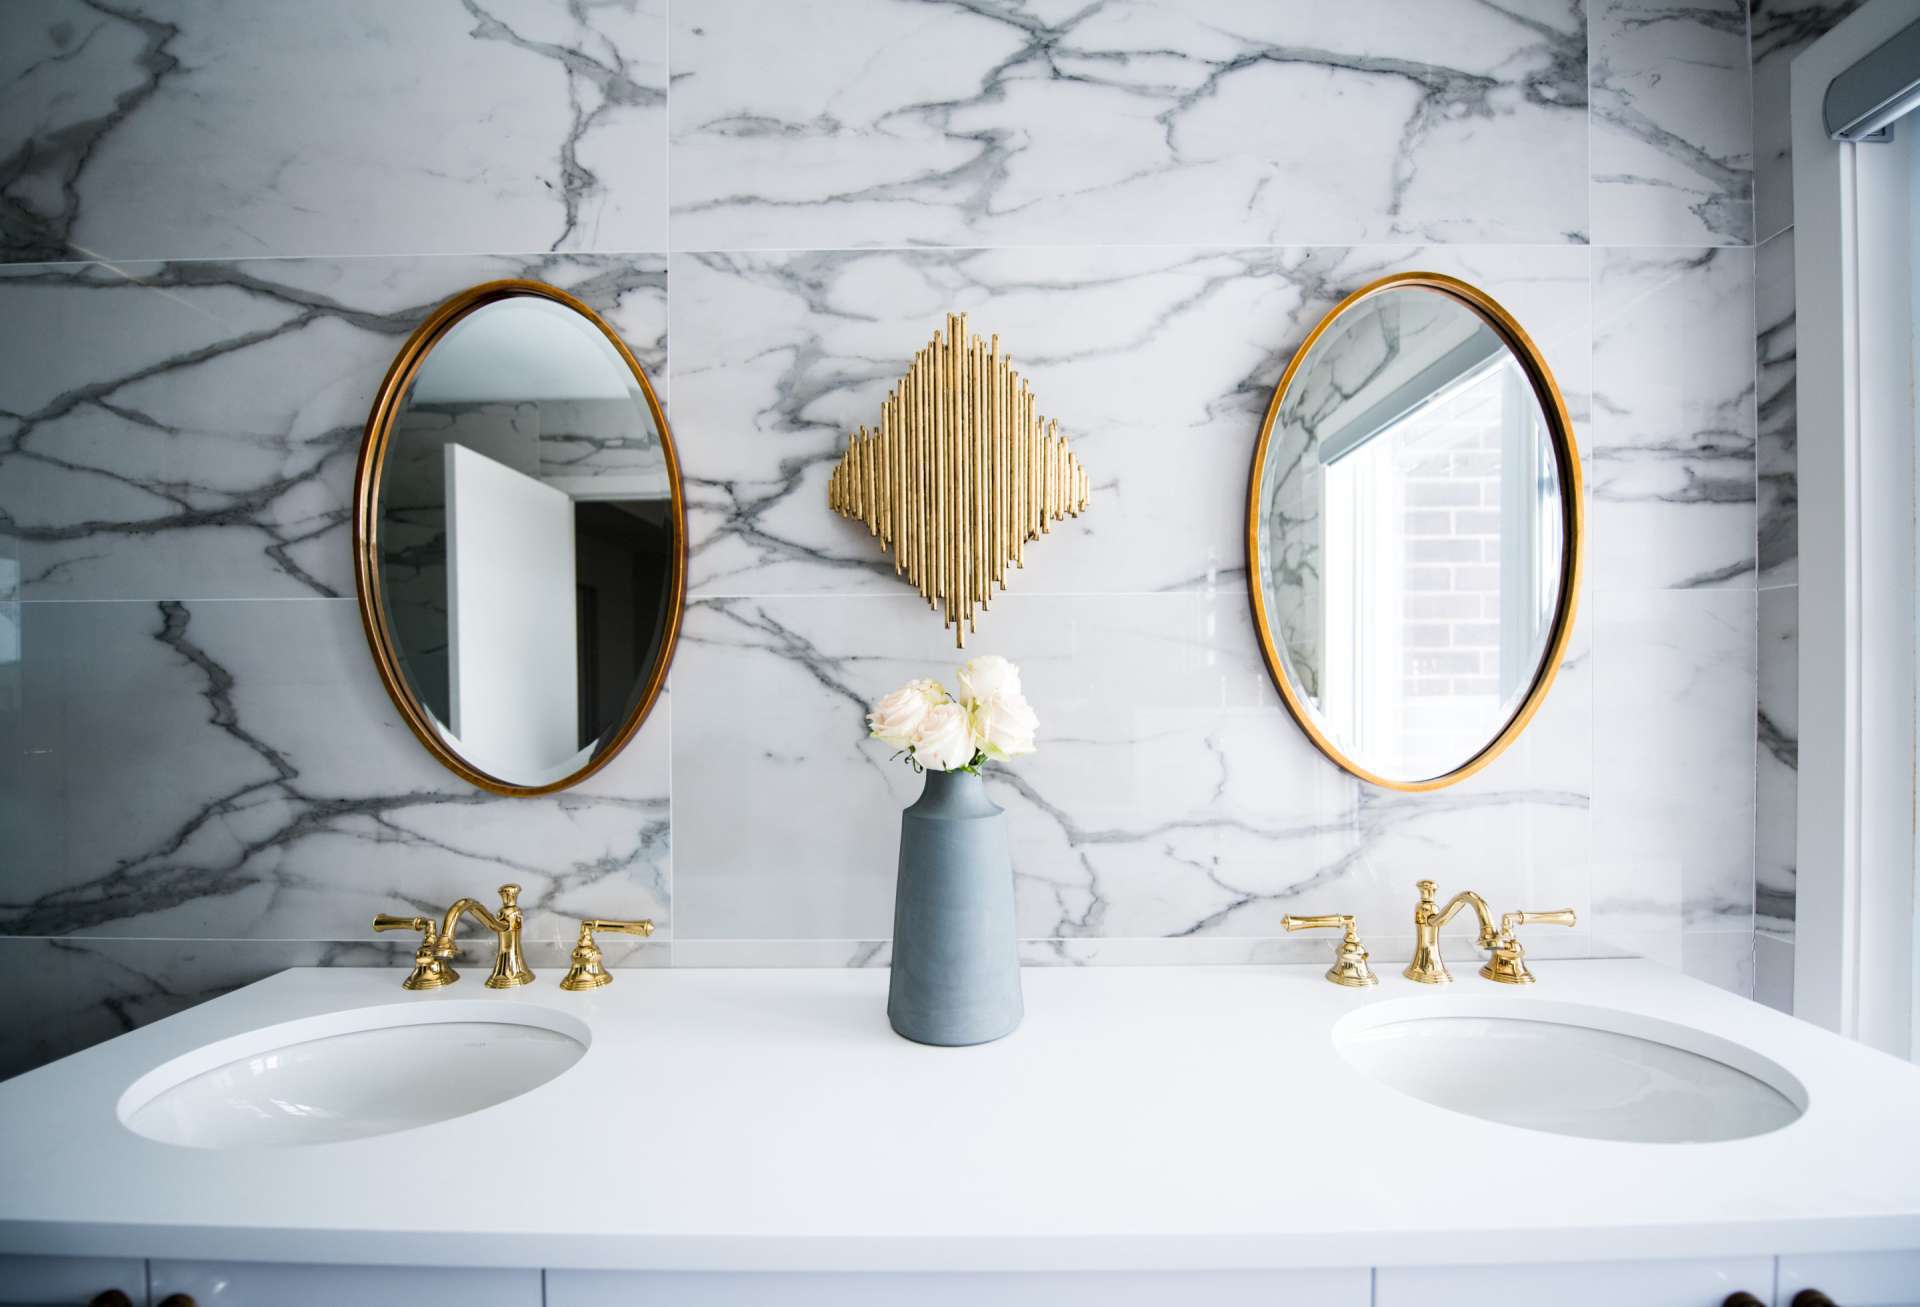 A Move-In Bathroom Checklist for Your First Apartment